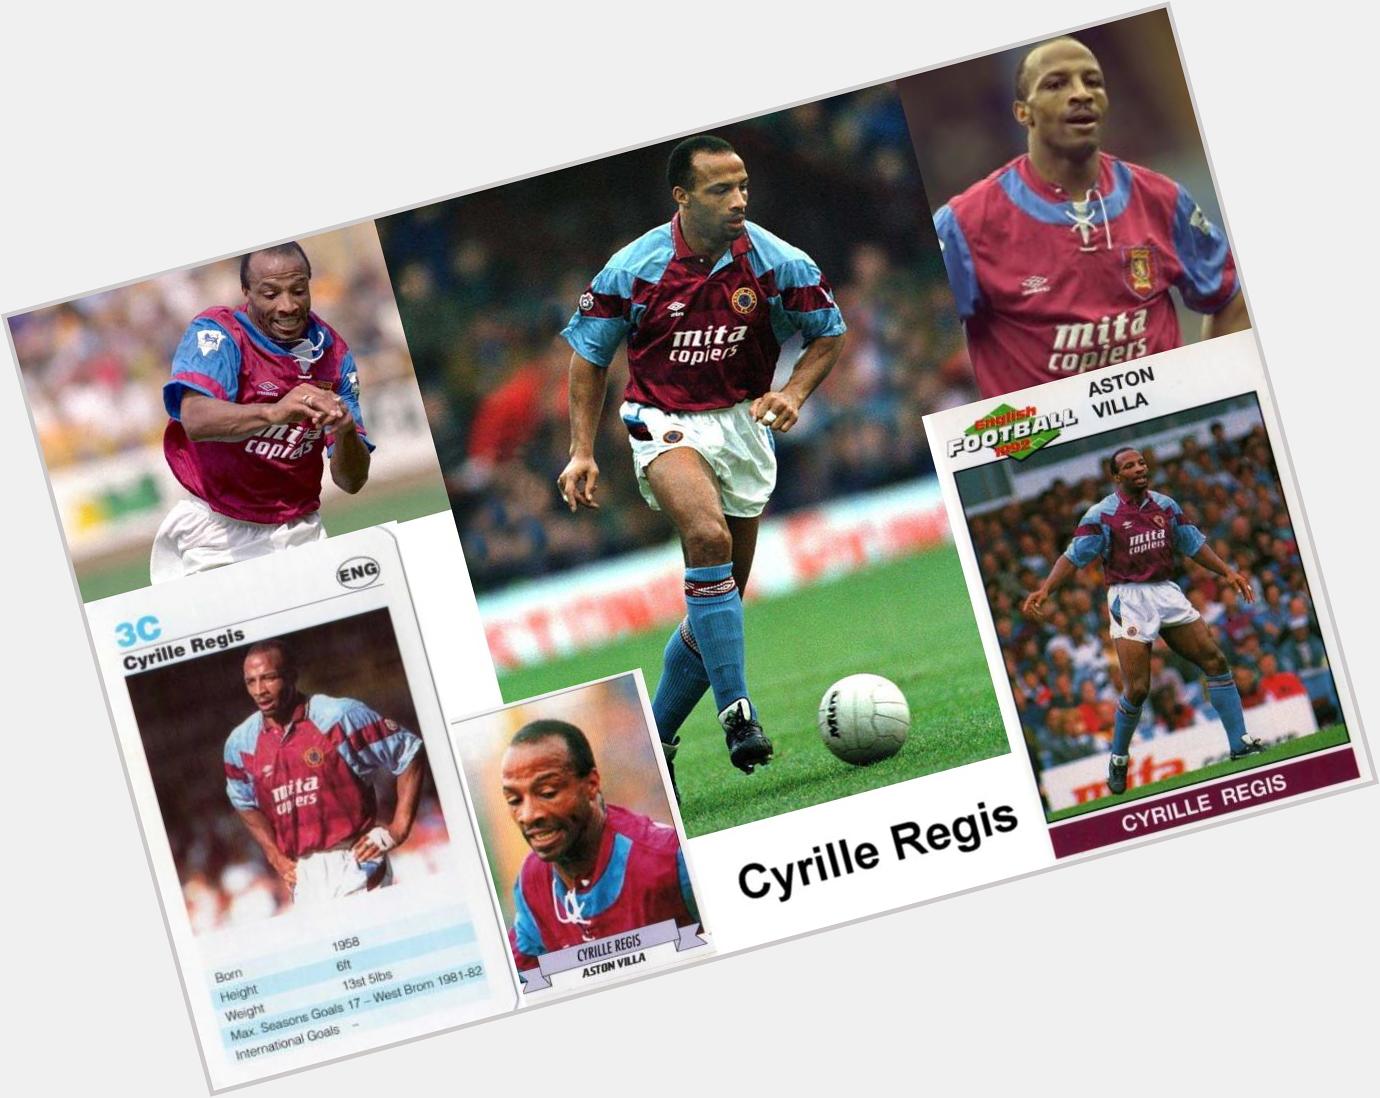 Happy Birthday 
Cyrille Regis 9 February 1958
played for Villa 1991 1993
52 games 12 goals 